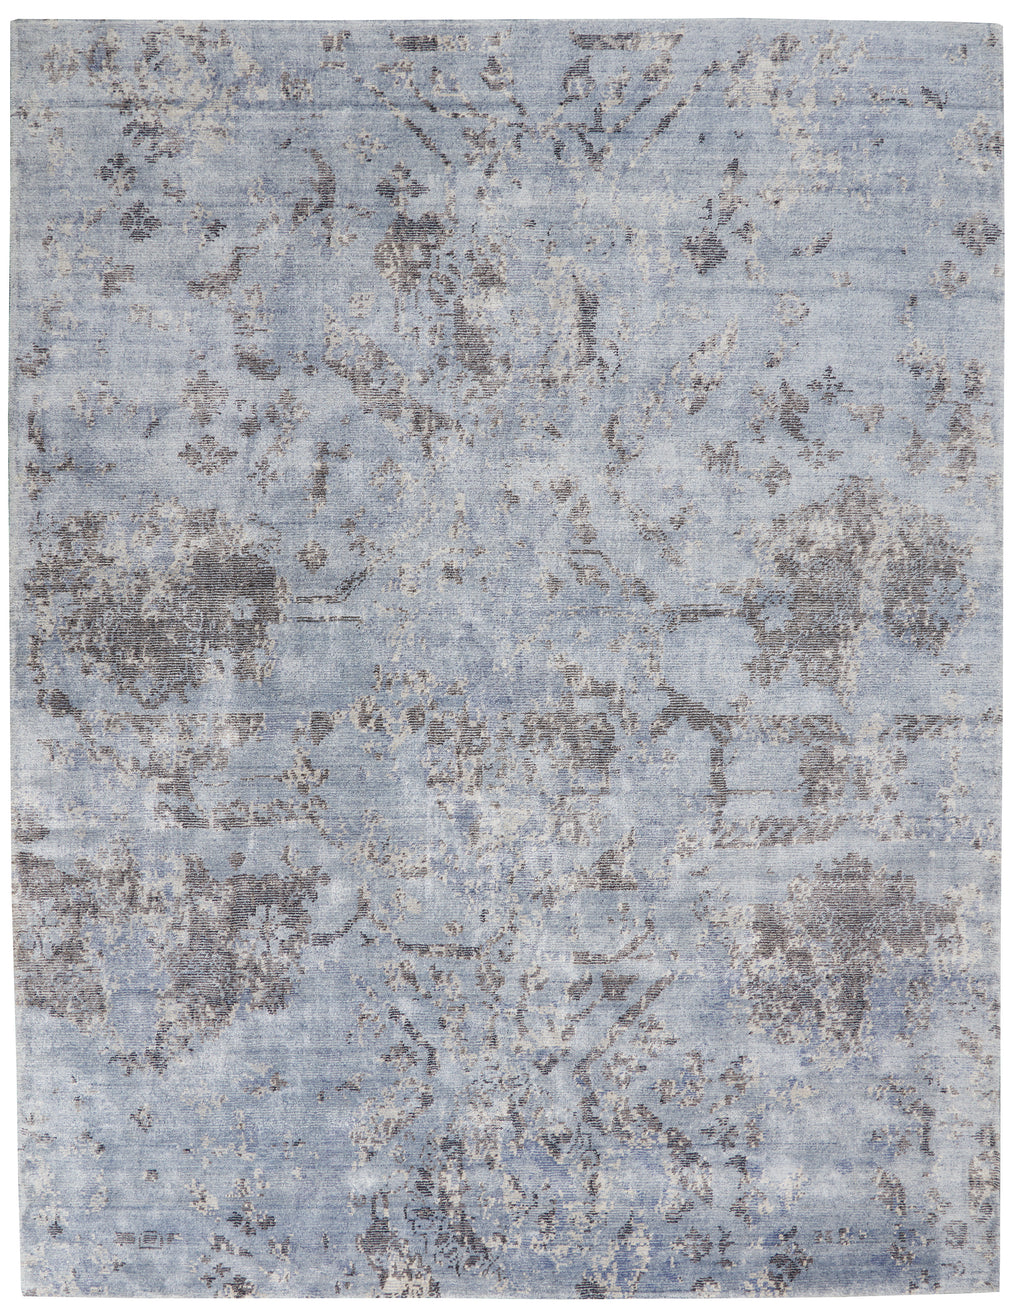 Vintage-inspired rug with distressed floral pattern adds elegance to decor.